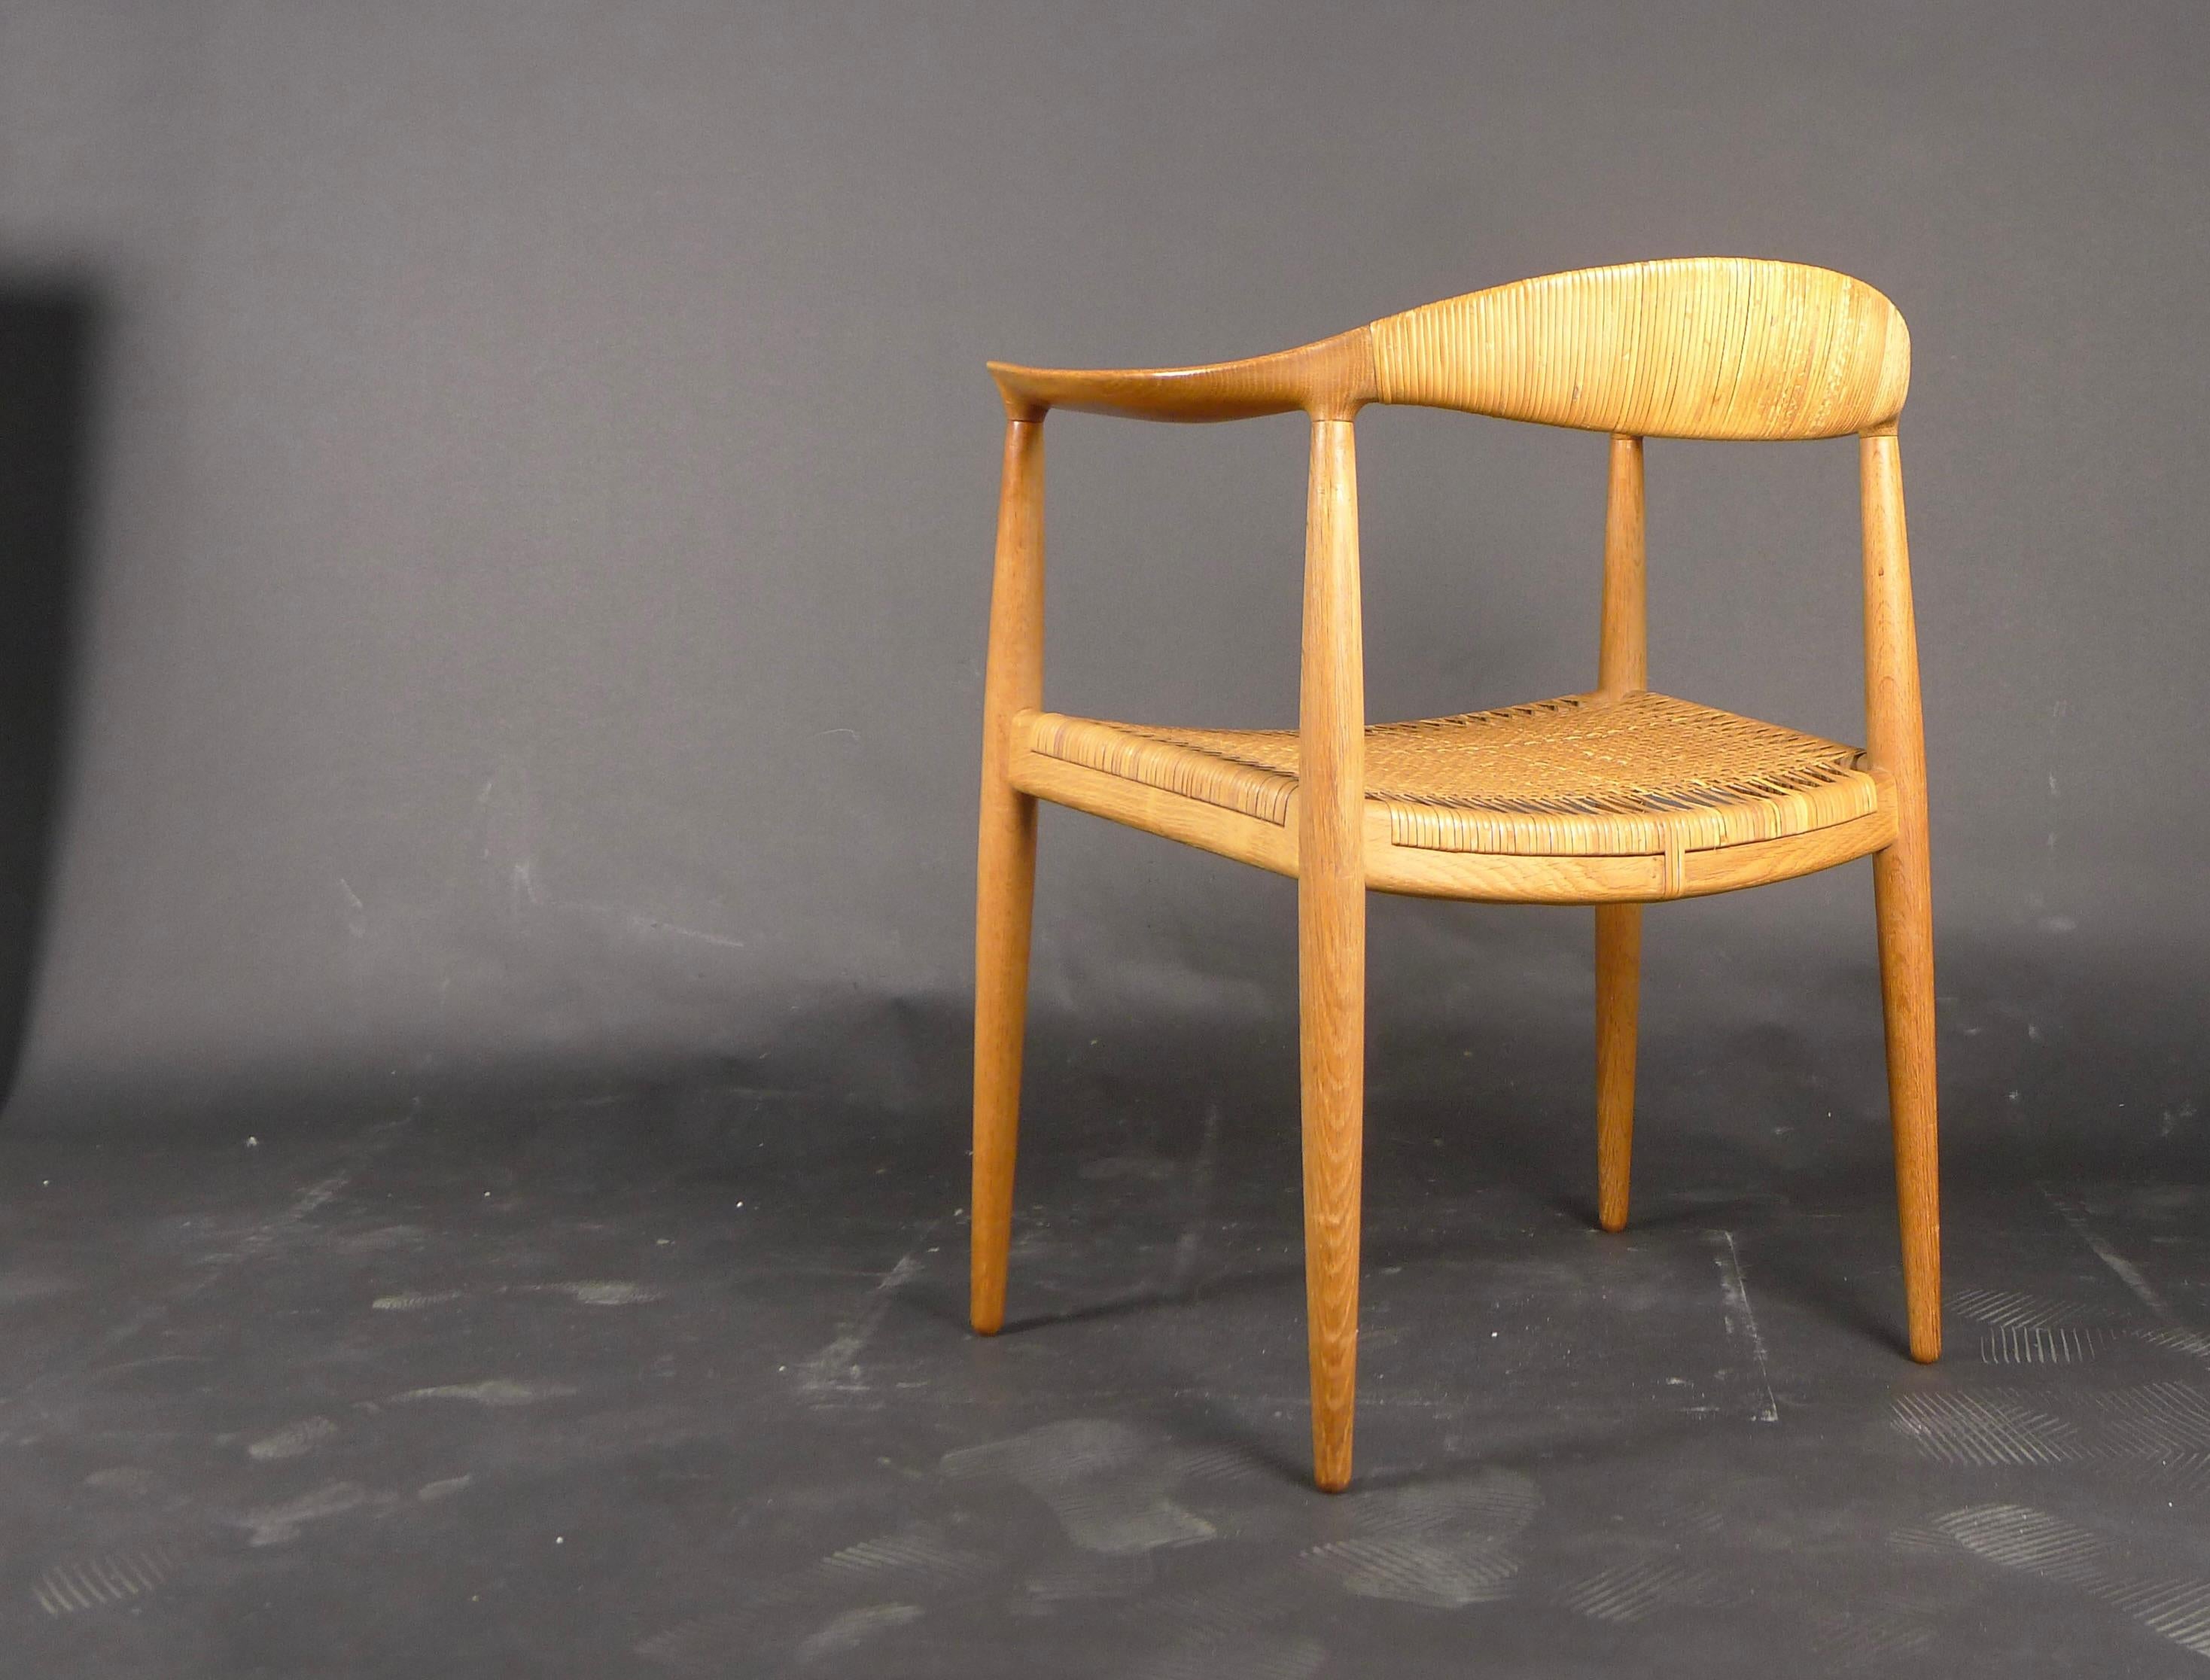 Hans Wegner, Round Chair JH501, oak and cane, made by Johannes Hansen For Sale 1